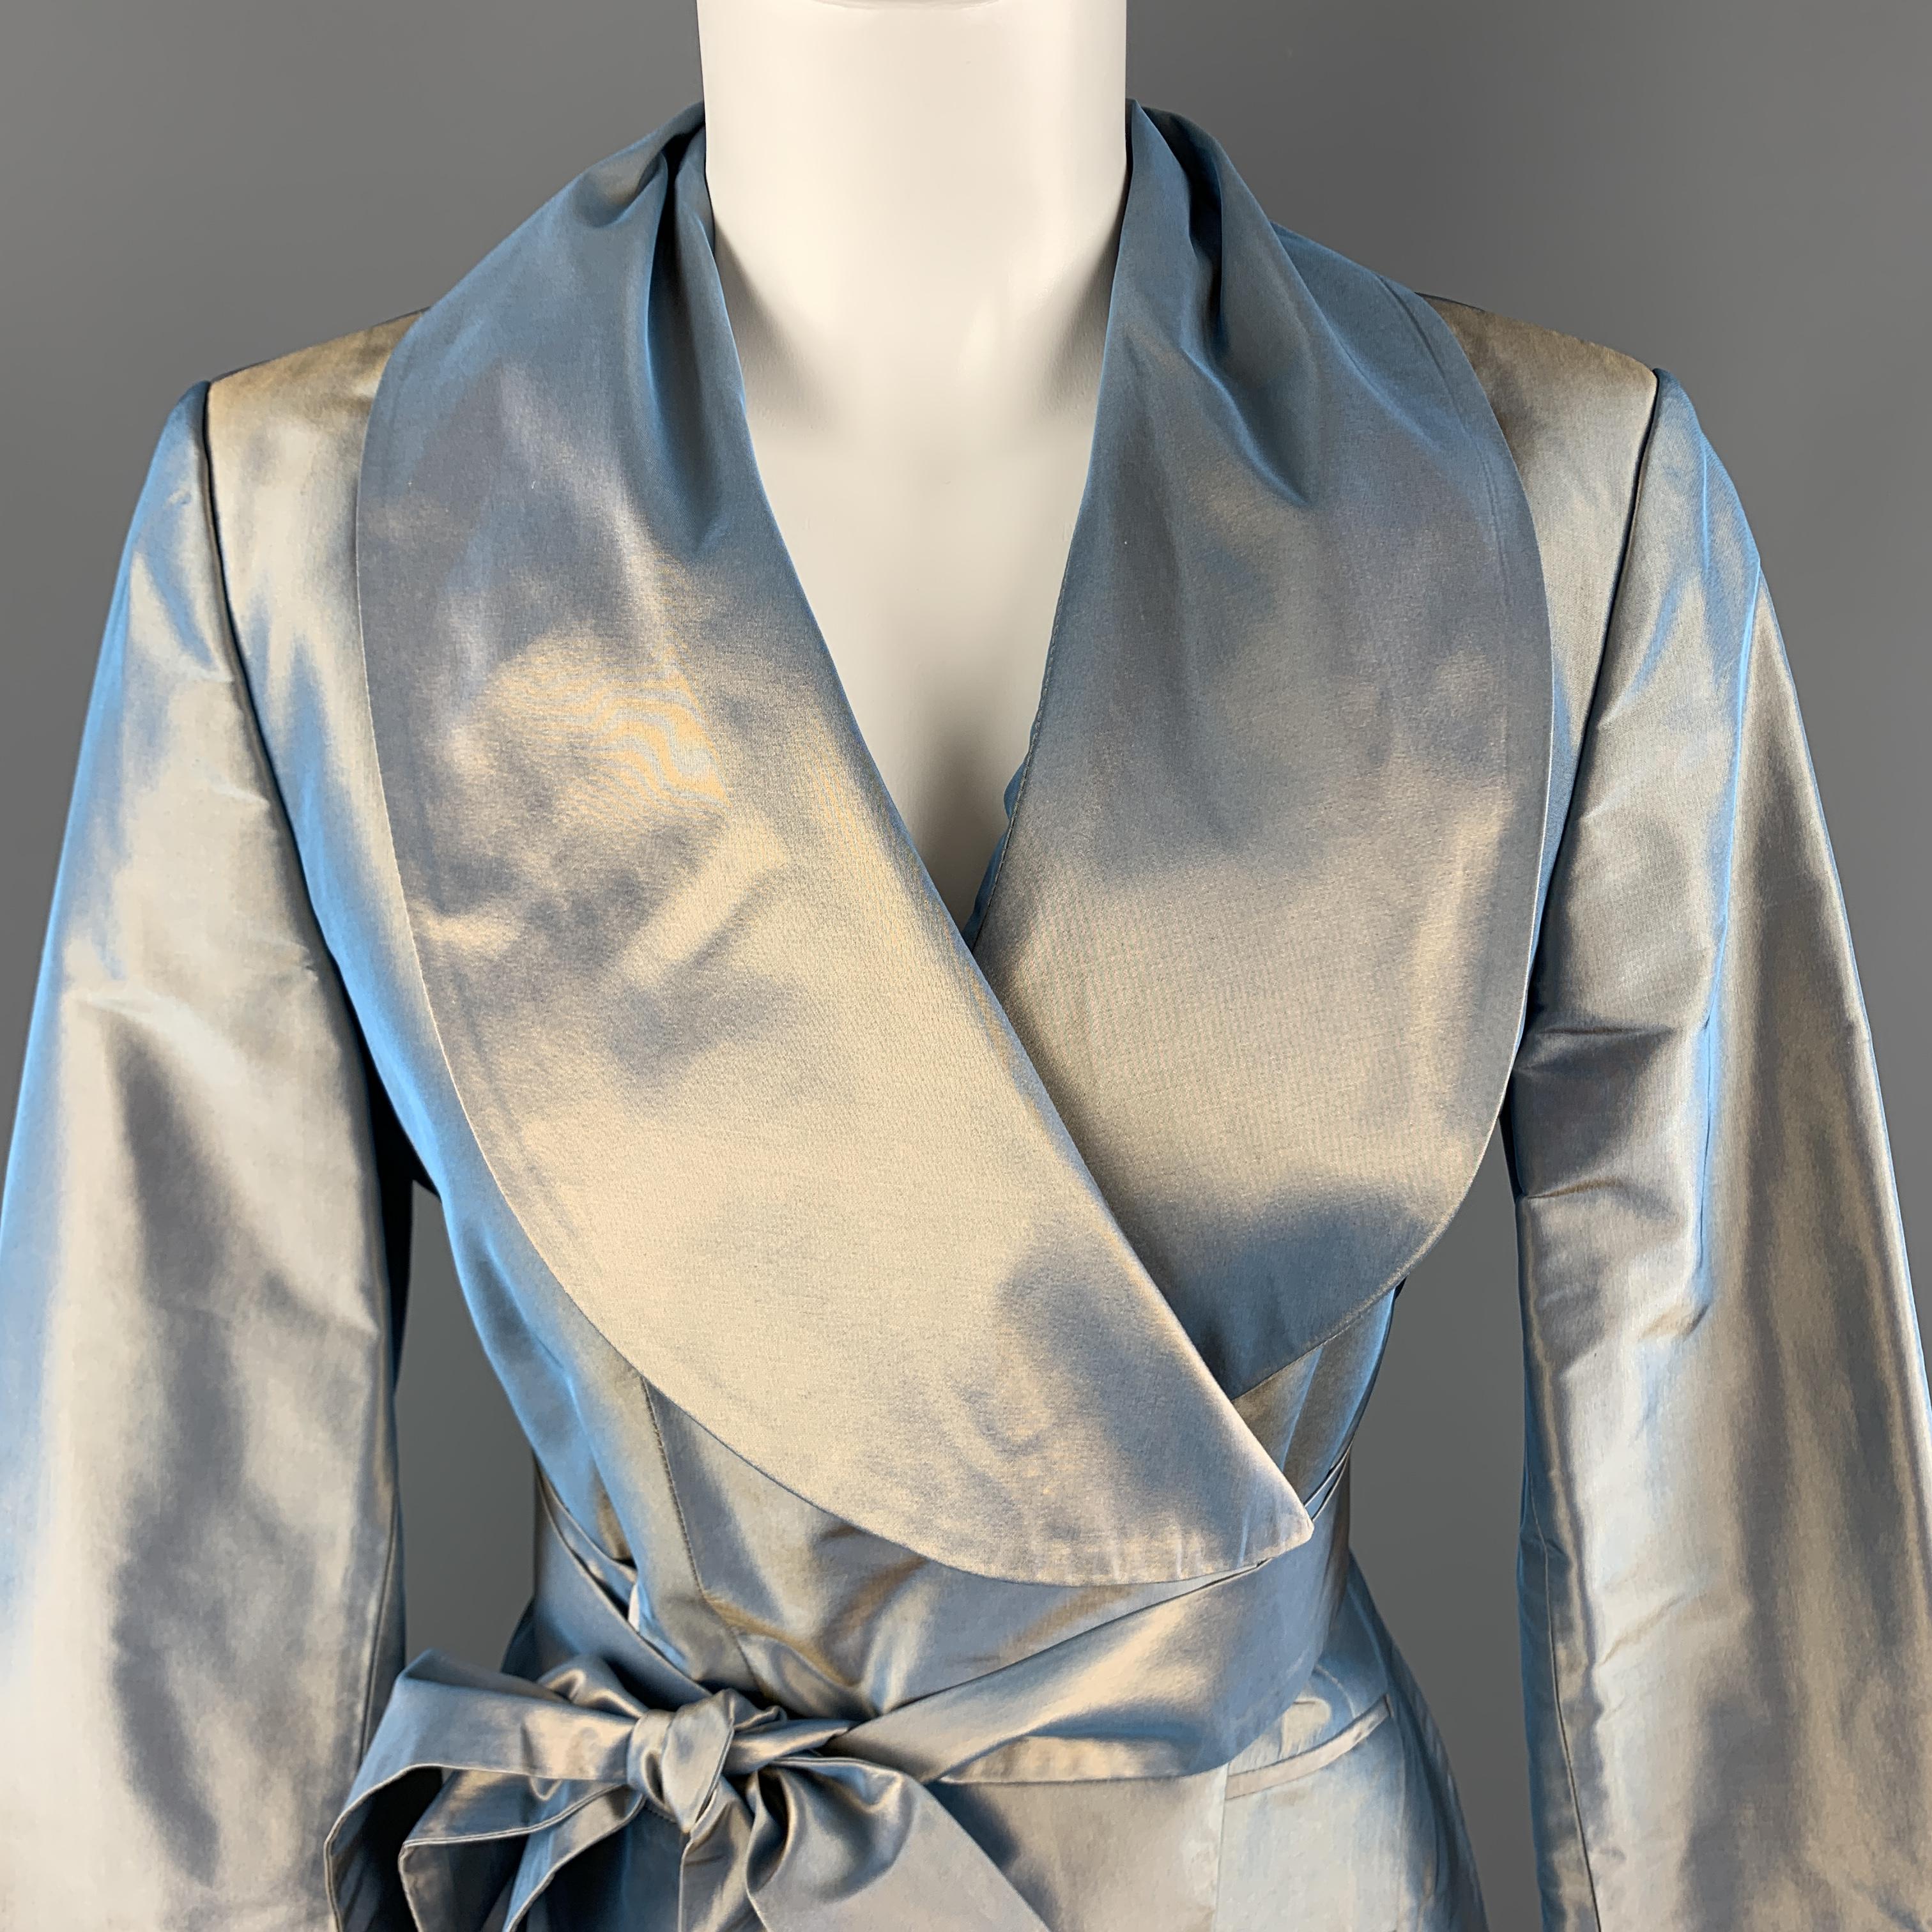 PAUW jacket comes in a gorgeous blue silk taffeta with a beige iridescent sheen and features a shawl collar, darted hem, and wrap tie belt closure. Made in Belgium.

Excellent Pre-Owned Condition.
Marked: JP 2
Original Retail Price: